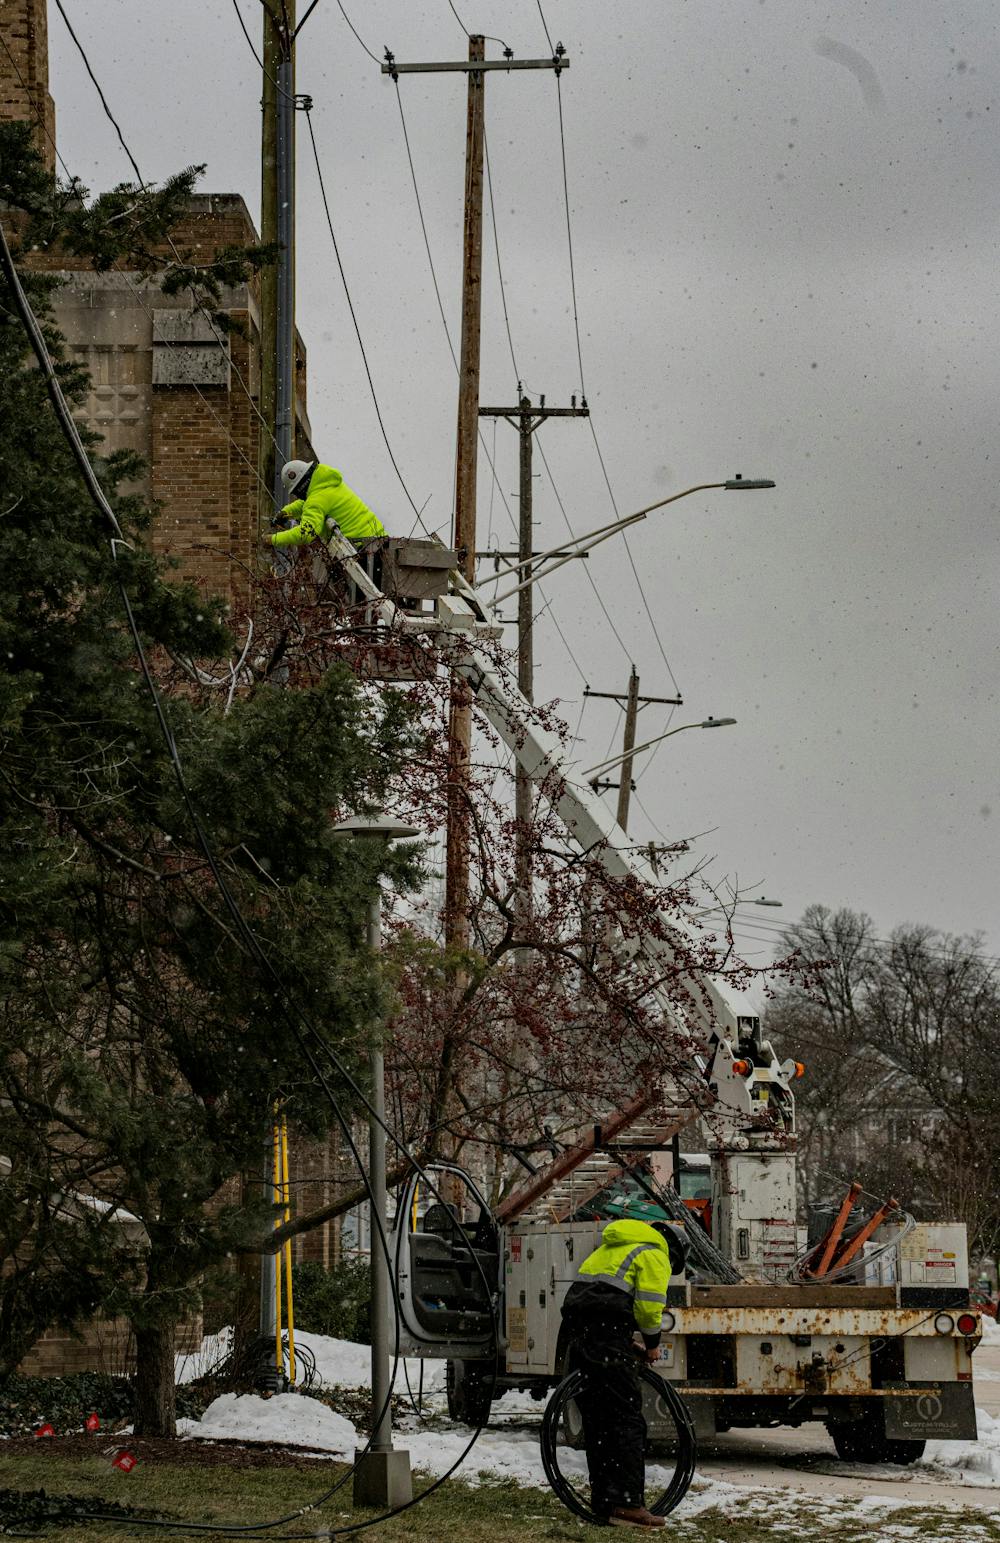 A worker fixing the power lines in front of the People's Church located across the street from the under construction MSU Federal Credit Union branch site. Shot Jan. 19, 2022